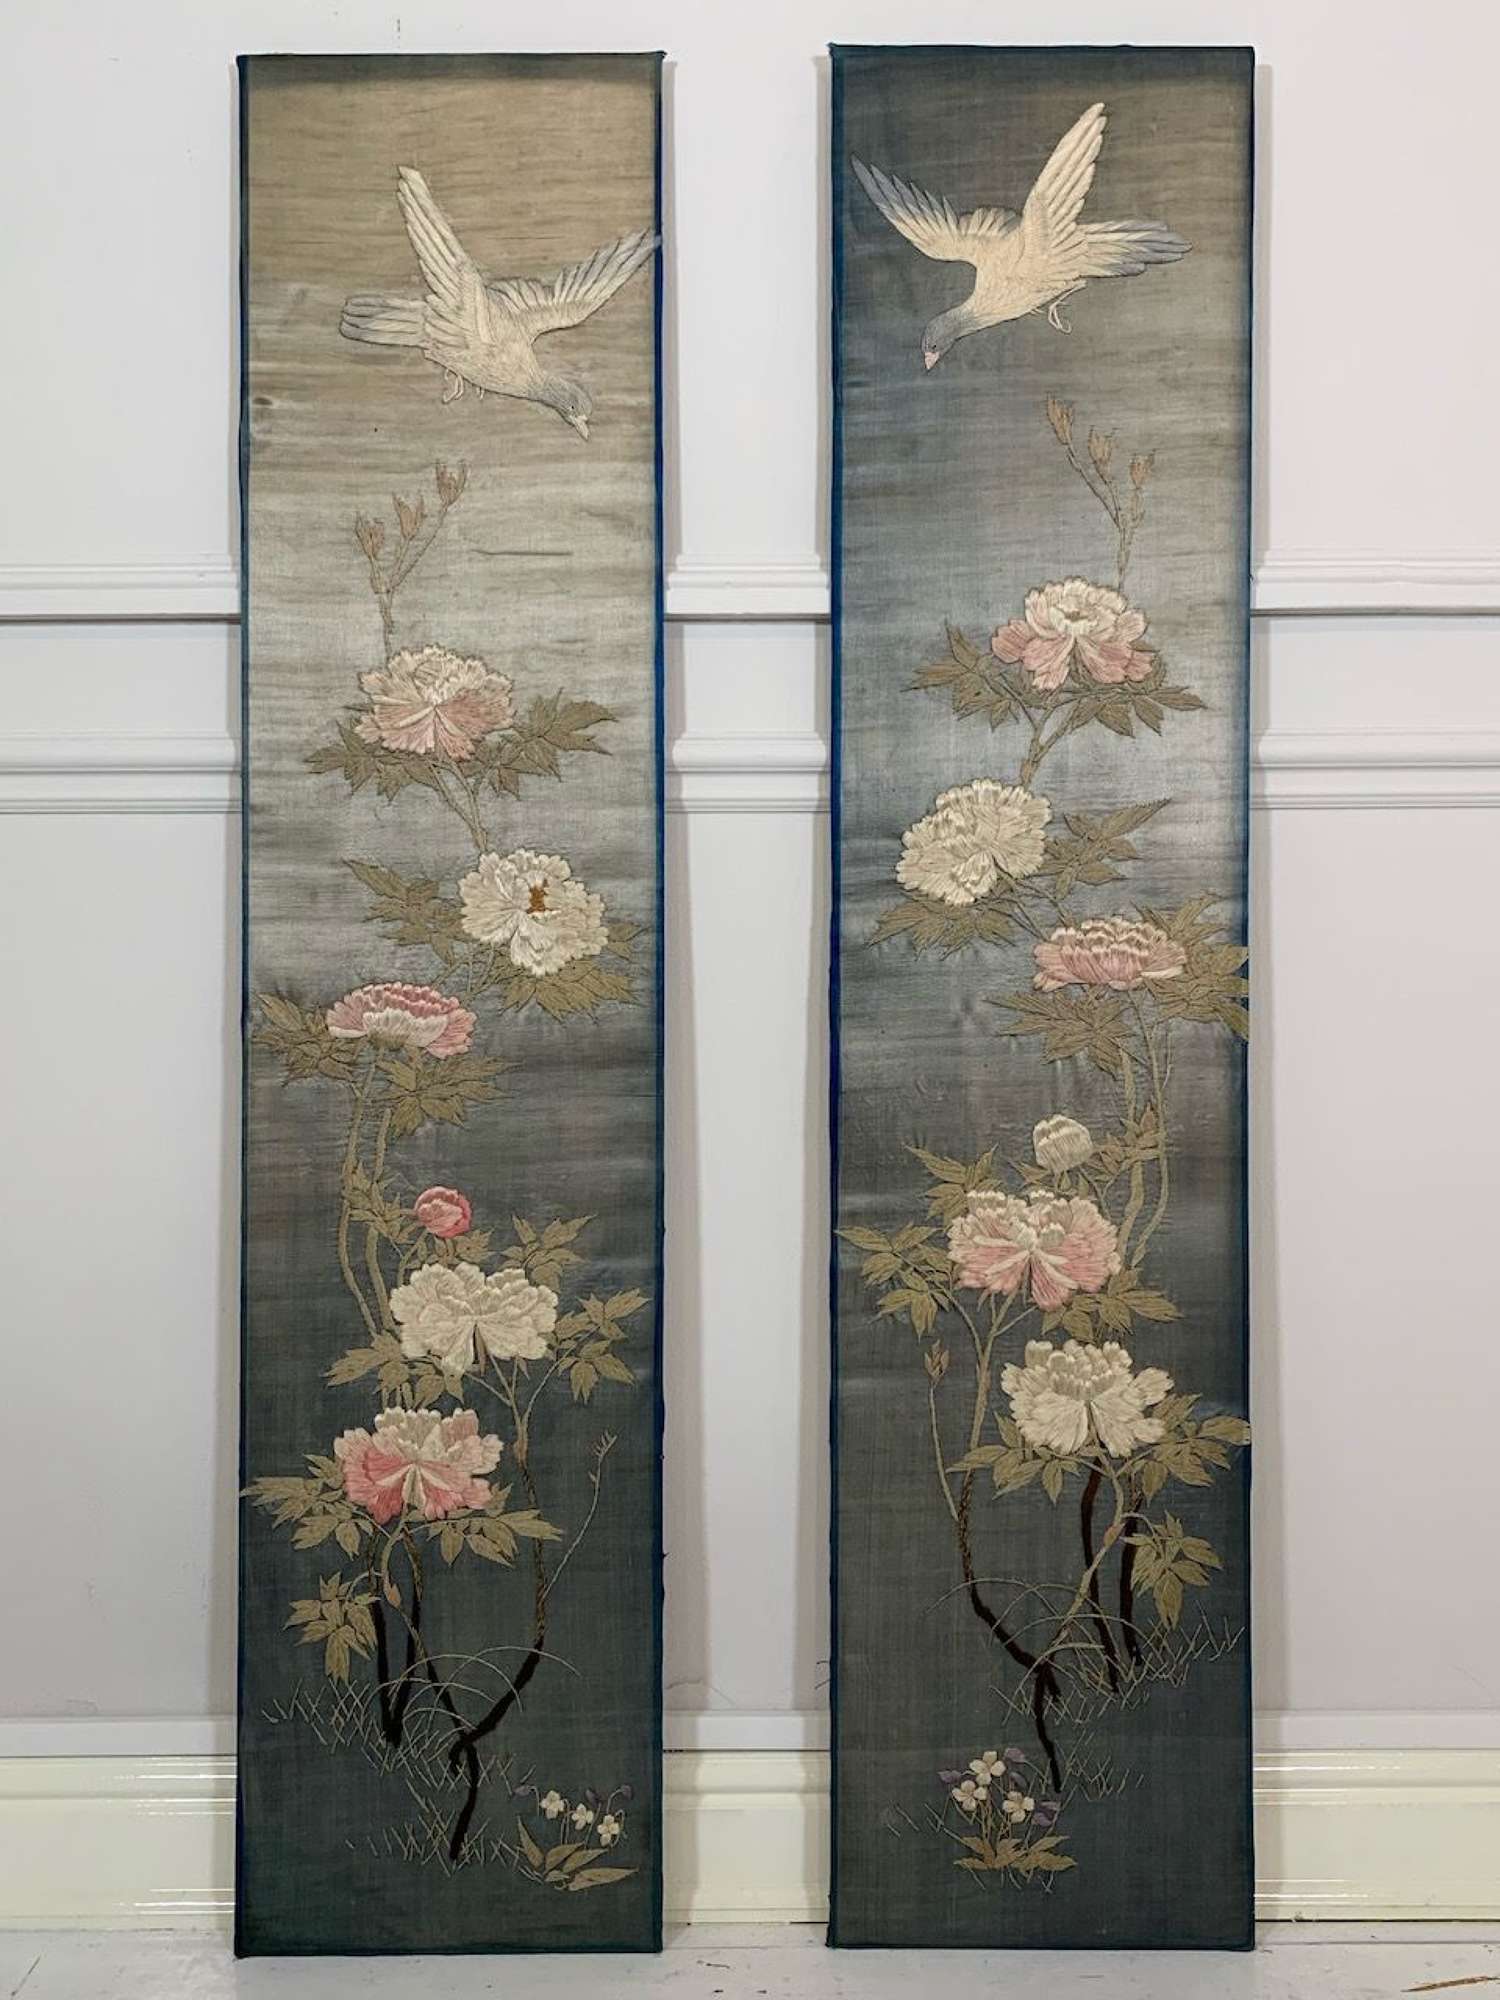 Pair of embroidered panels